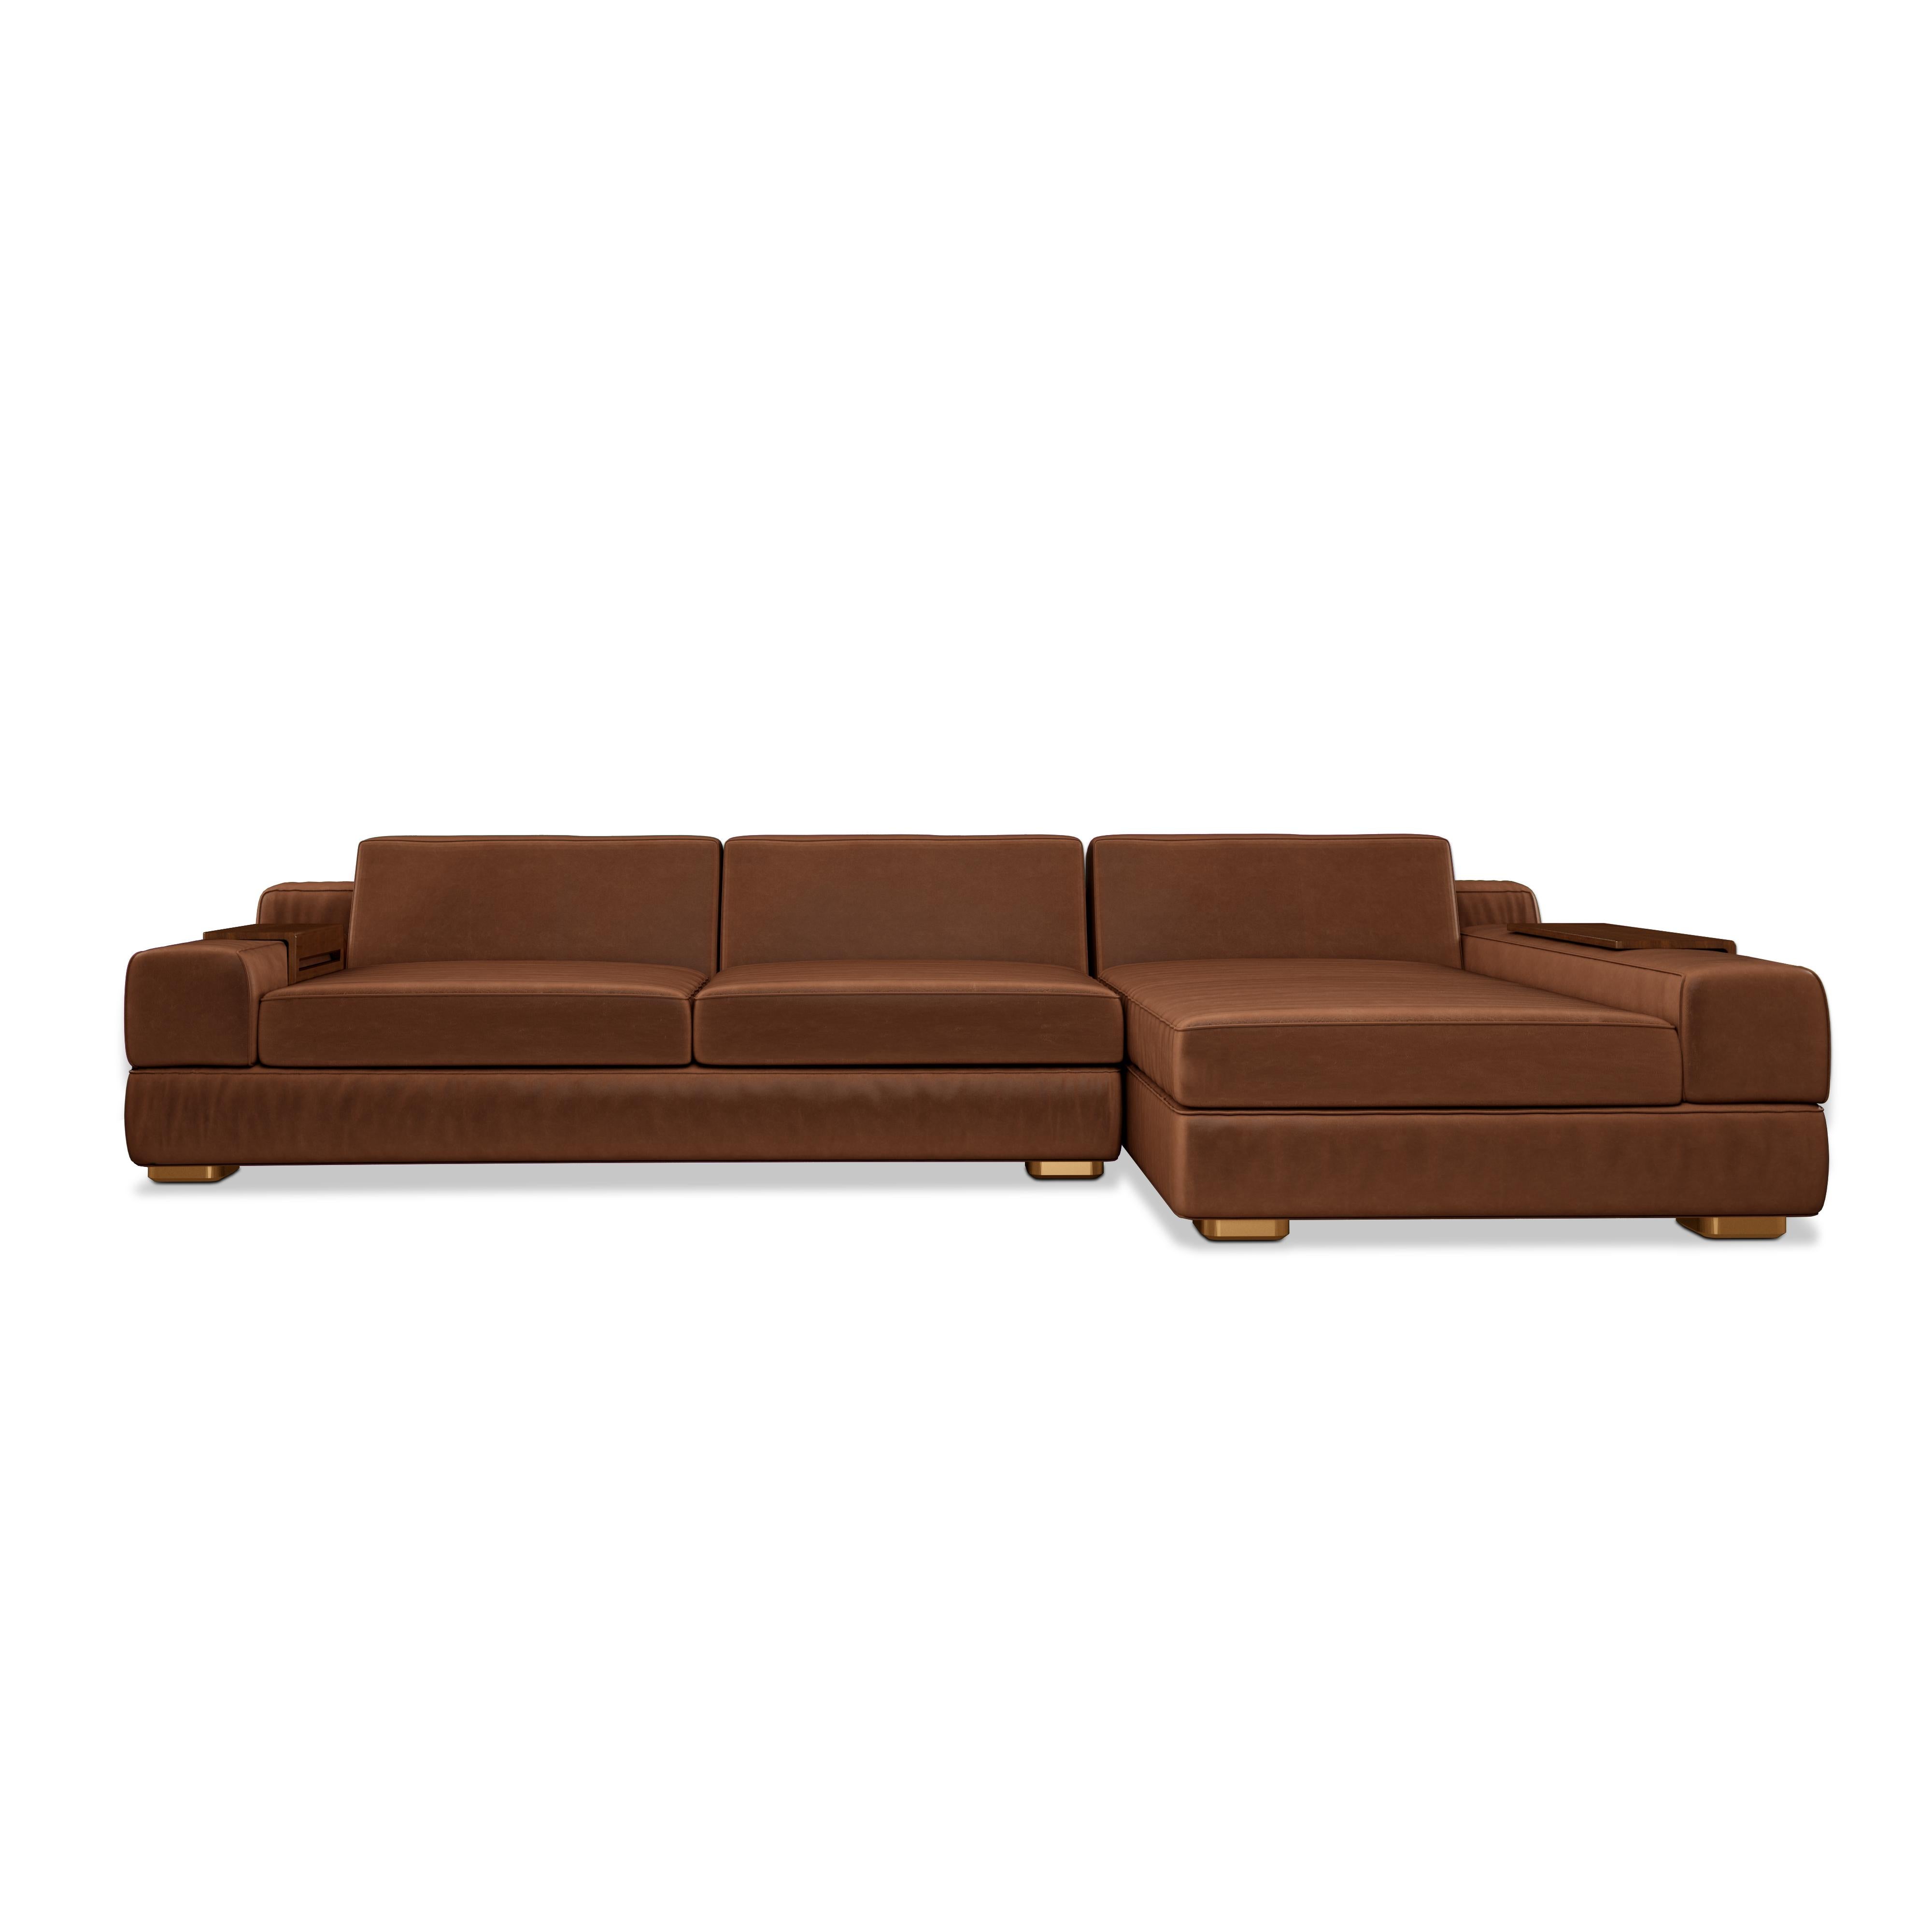 Contemporary 21st Century Canyon Sofa Leather Walnut Wood For Sale